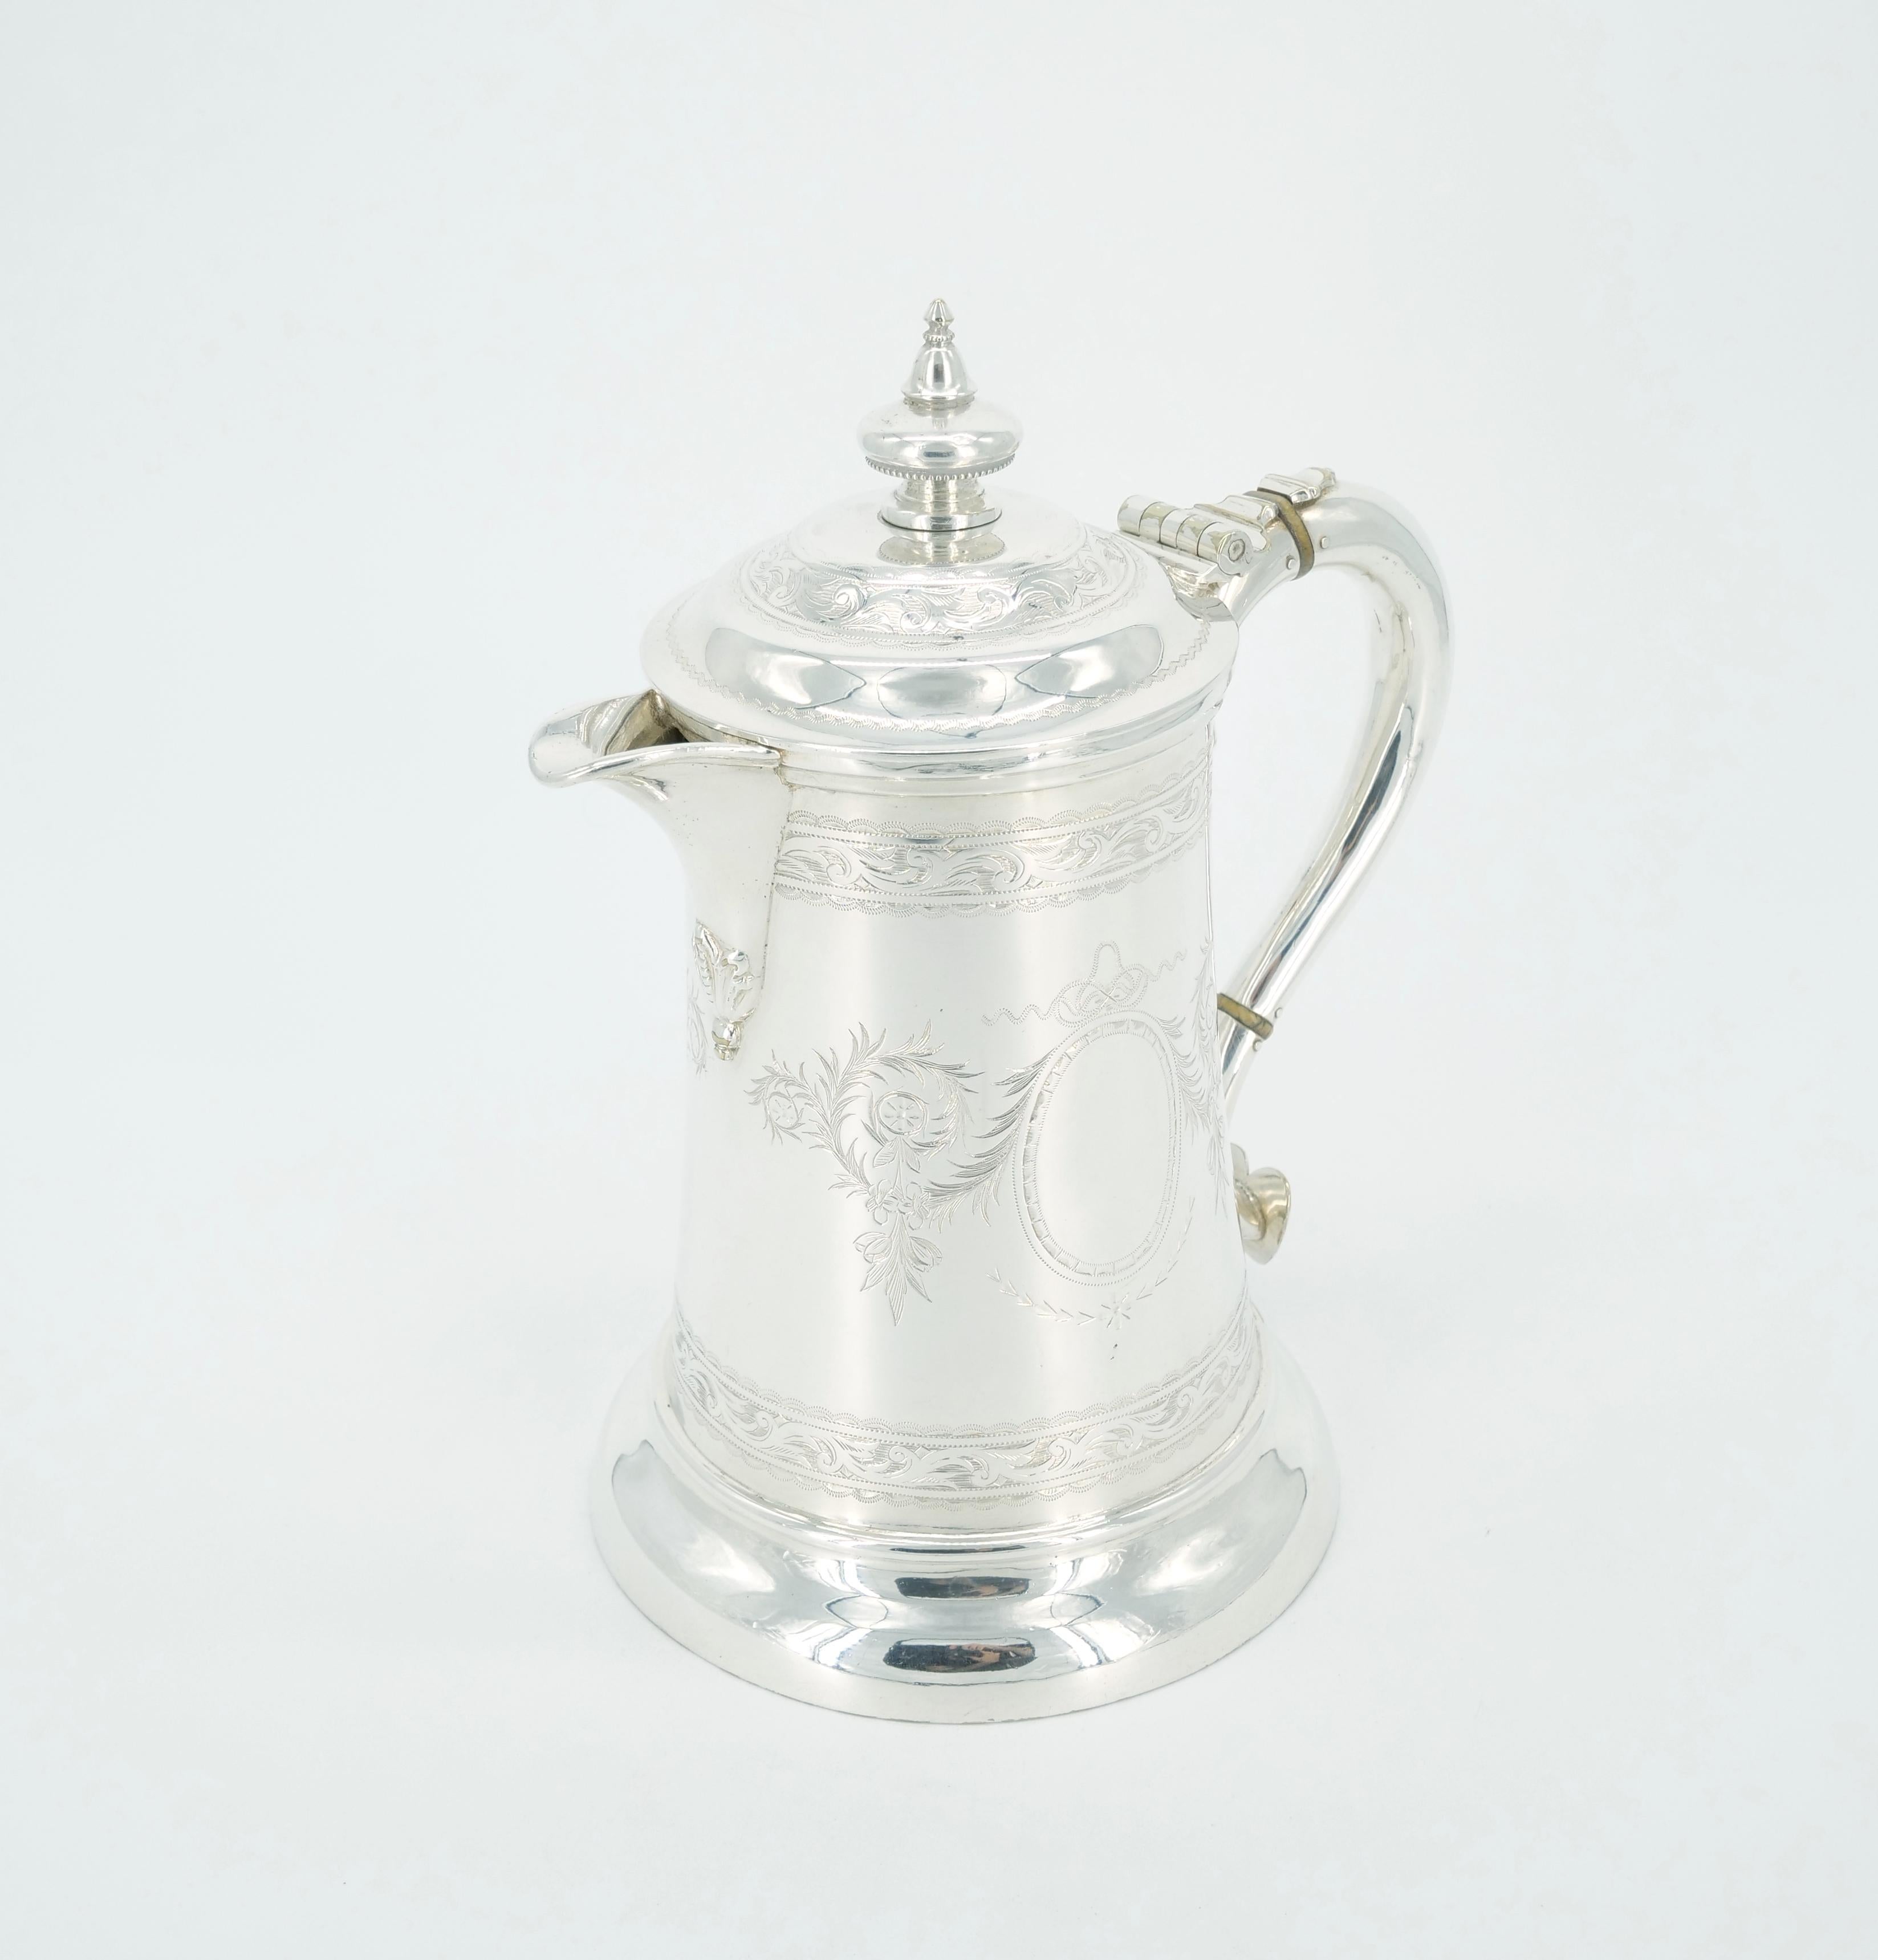 Elevate your collection with the exquisite charm of our Old English Silver Plate Queen Anne Tankard by Walker & Hall. The exterior boasts a rich silver plate finish adorned with finely engraved foliate decoration details on both sides, adding a